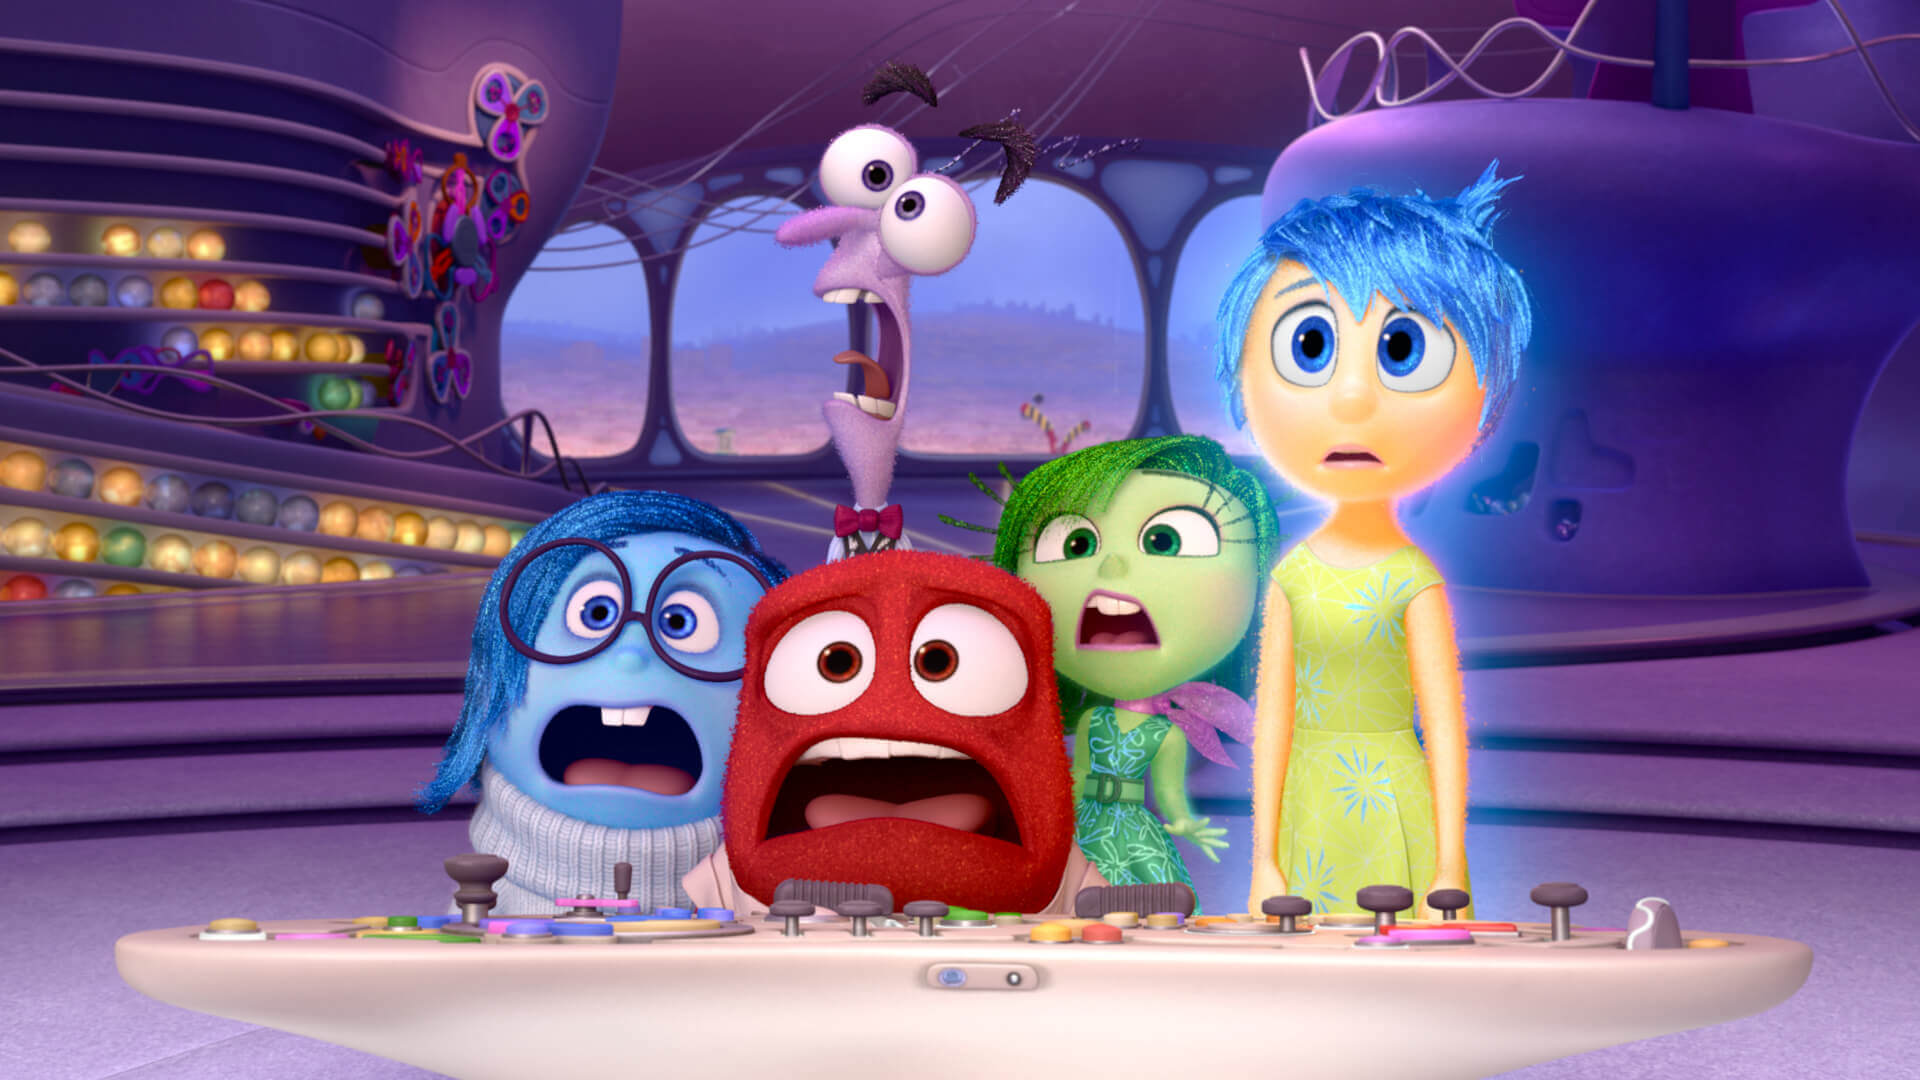 Lessons from the Movie "Inside Out"